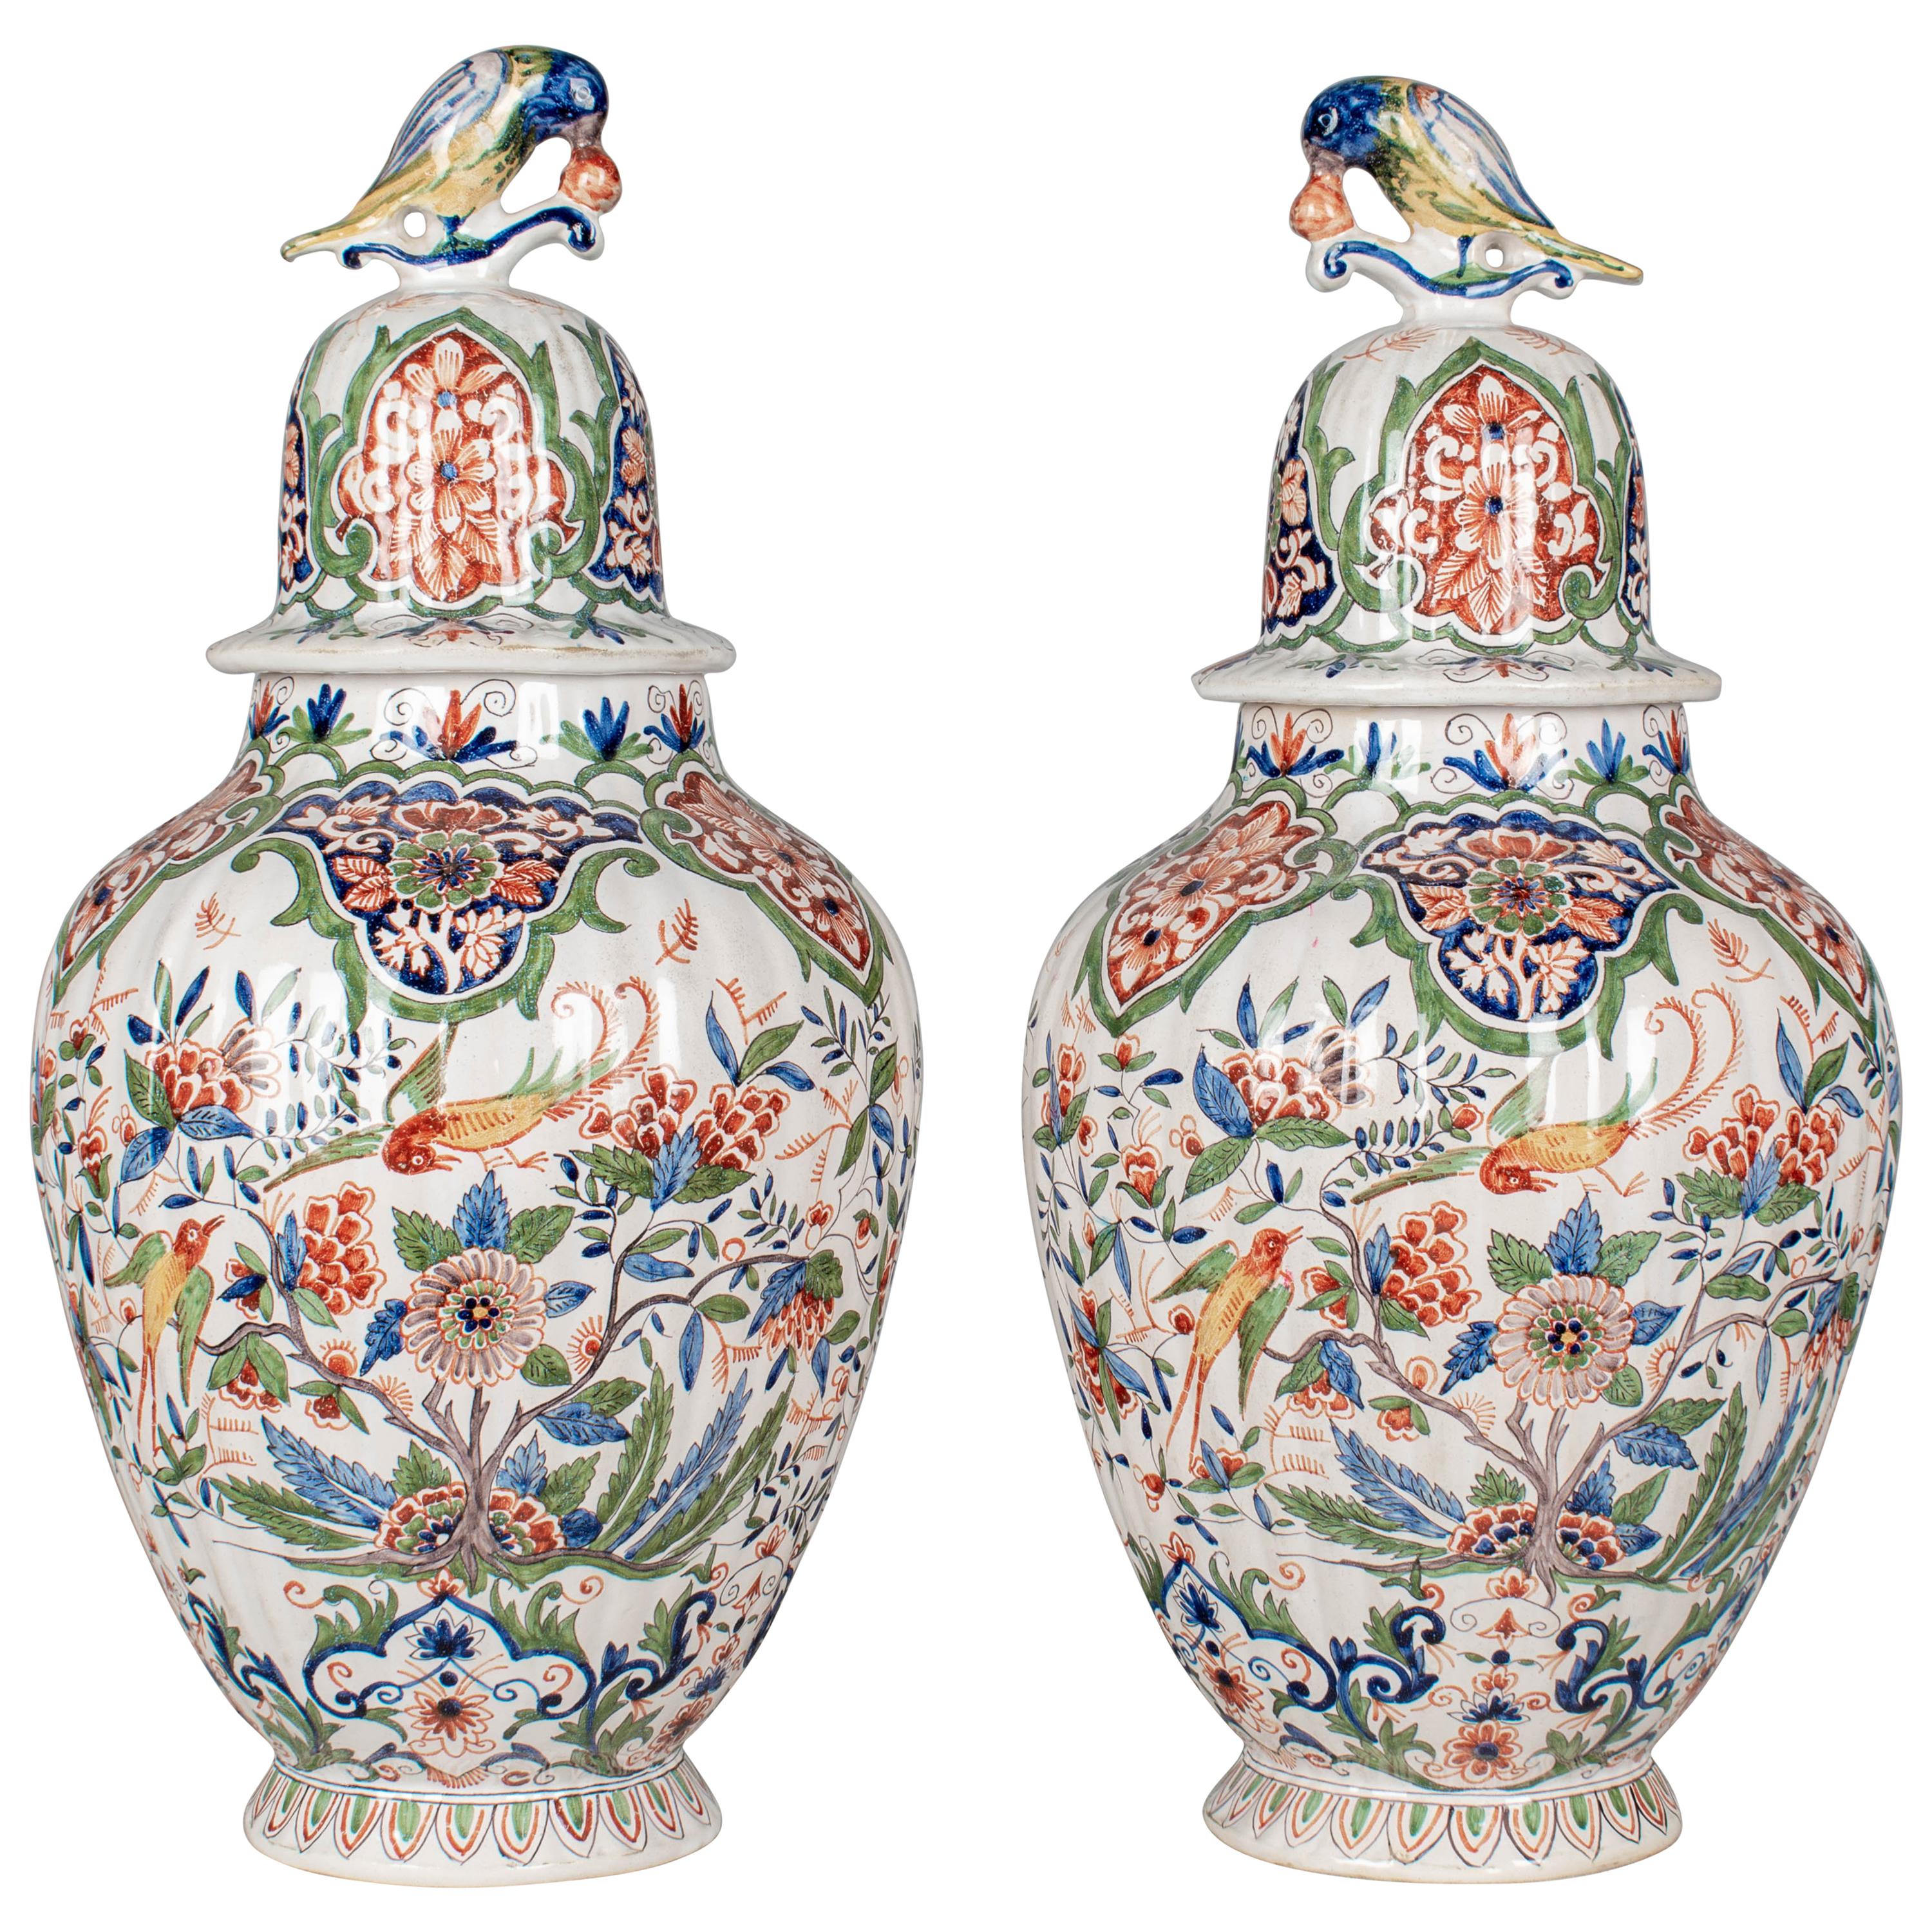 Pair of 19th Century Delft Faience Ginger Jars